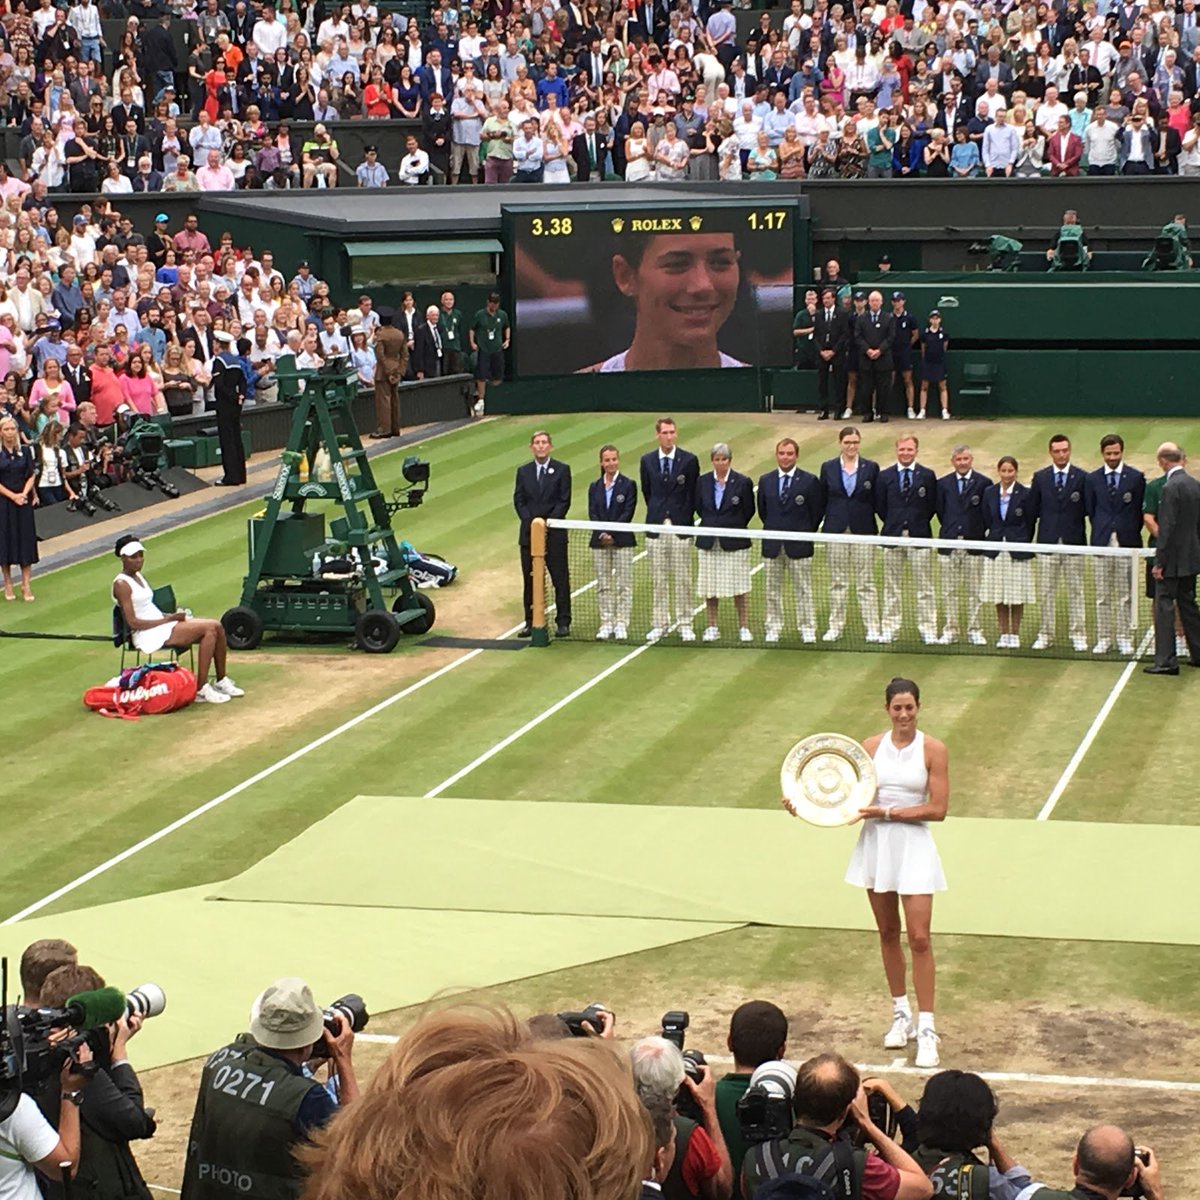 #TBT to watching @GarbiMuguruza win her 1st #Wimbledon title! She’s one of my favorite tennis players! Talk about a #MissionStatementMuse 😉